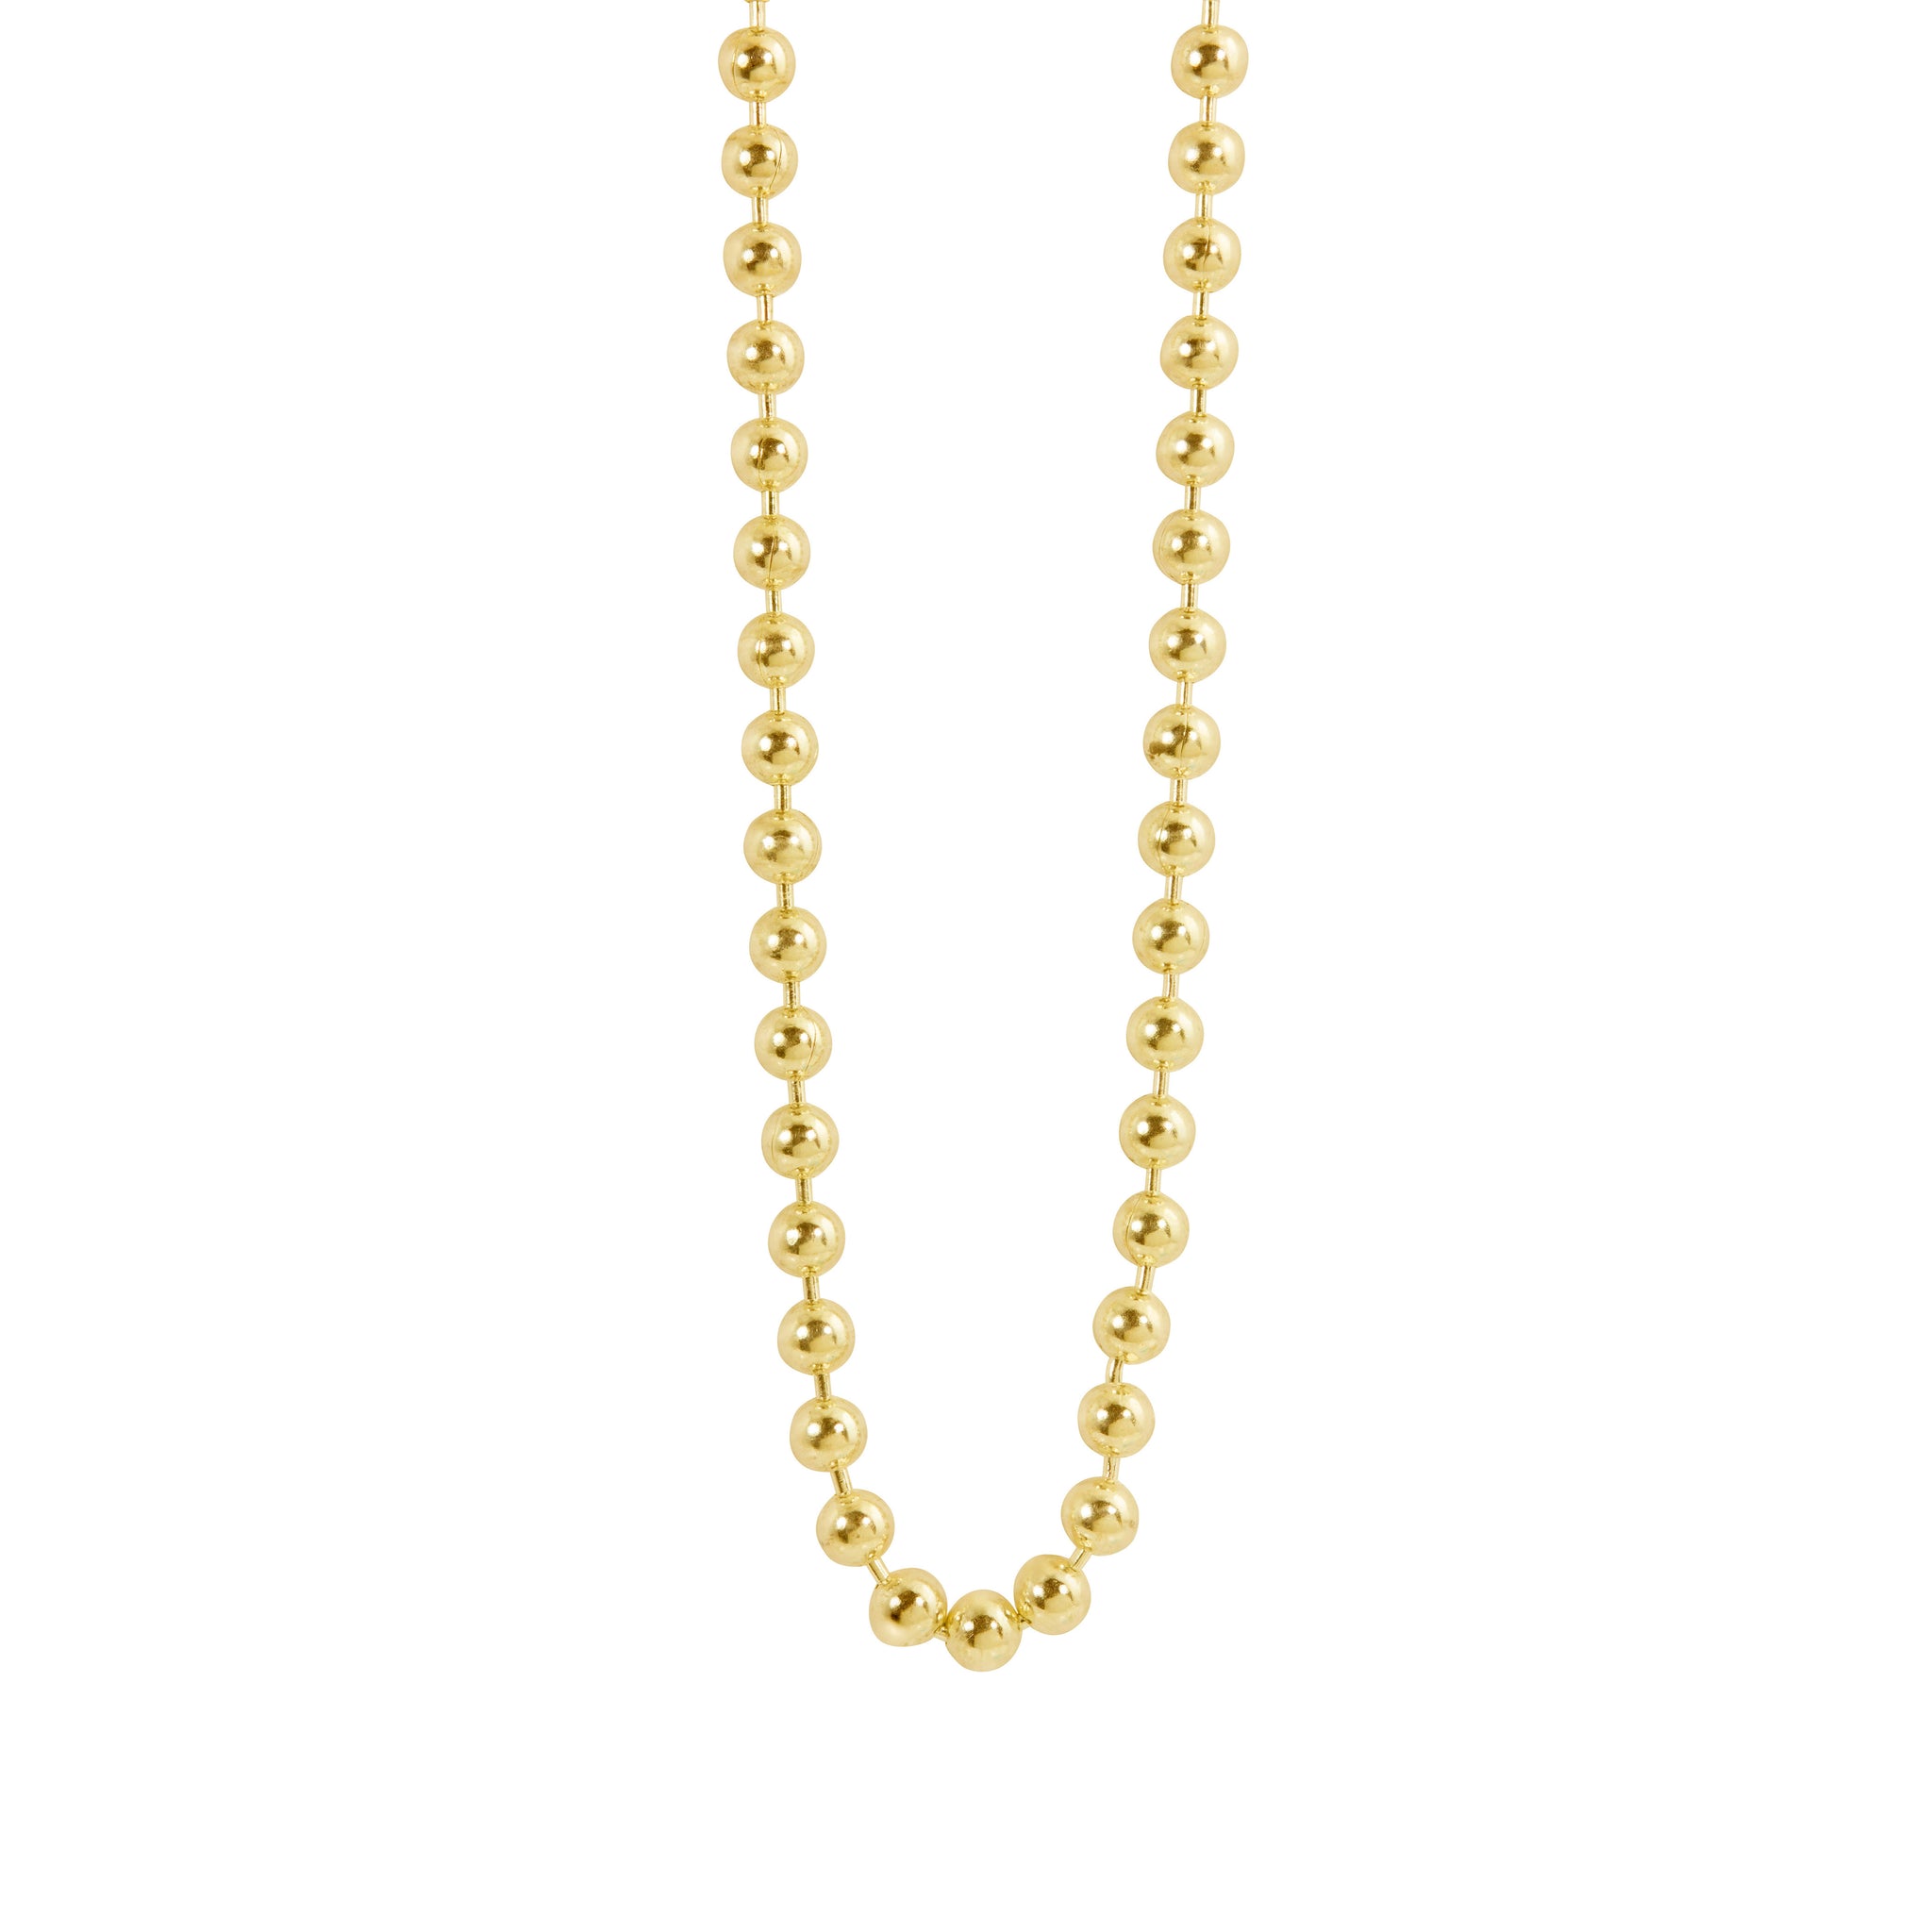 2mm 24k Shiny Gold Plated Cable Chain, Tiny Ball Bar Chain, Choker